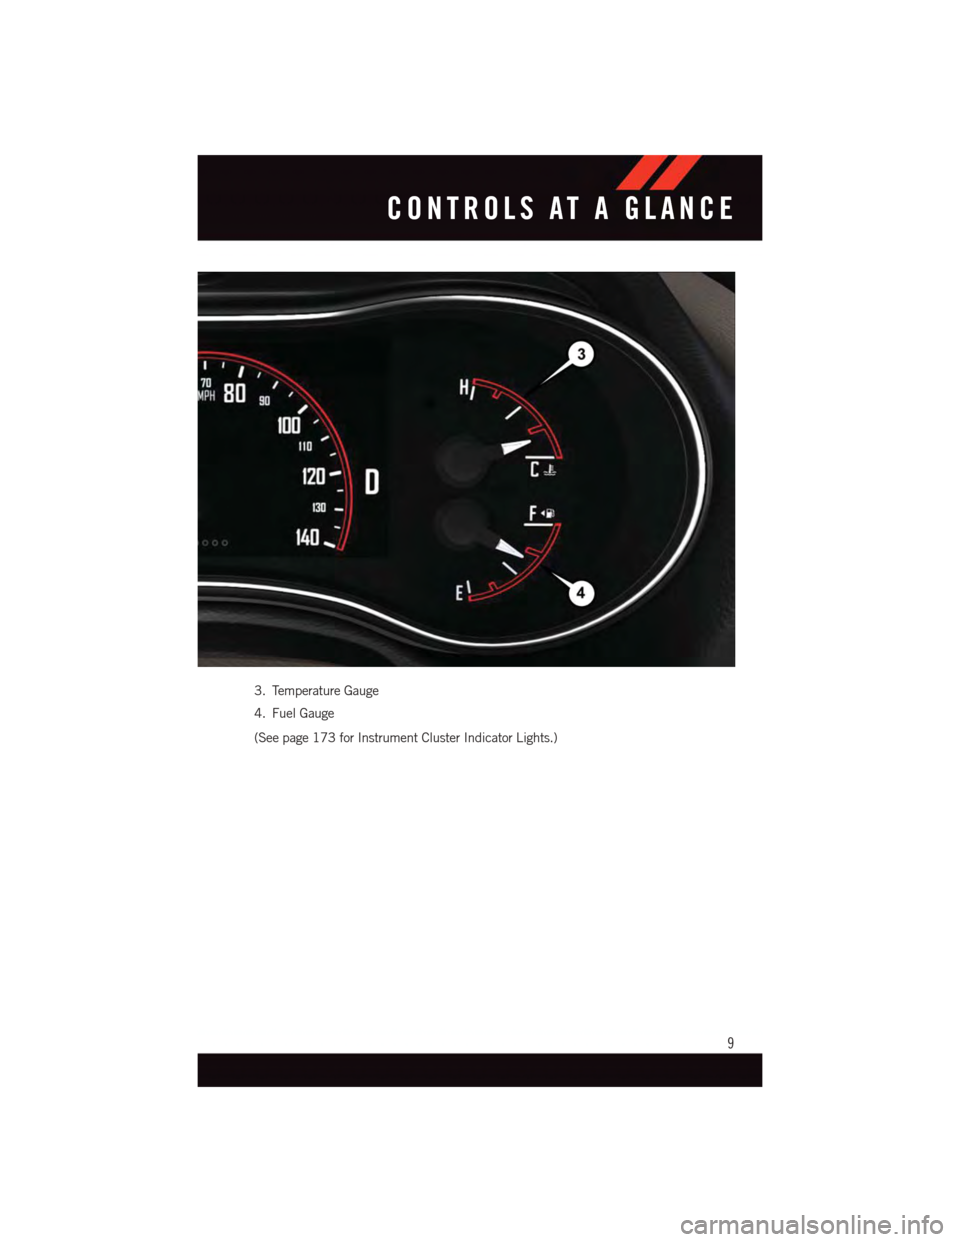 DODGE DURANGO 2015 3.G User Guide 3. Temperature Gauge
4. Fuel Gauge
(See page 173 for Instrument Cluster Indicator Lights.)
CONTROLS AT A GLANCE
9 